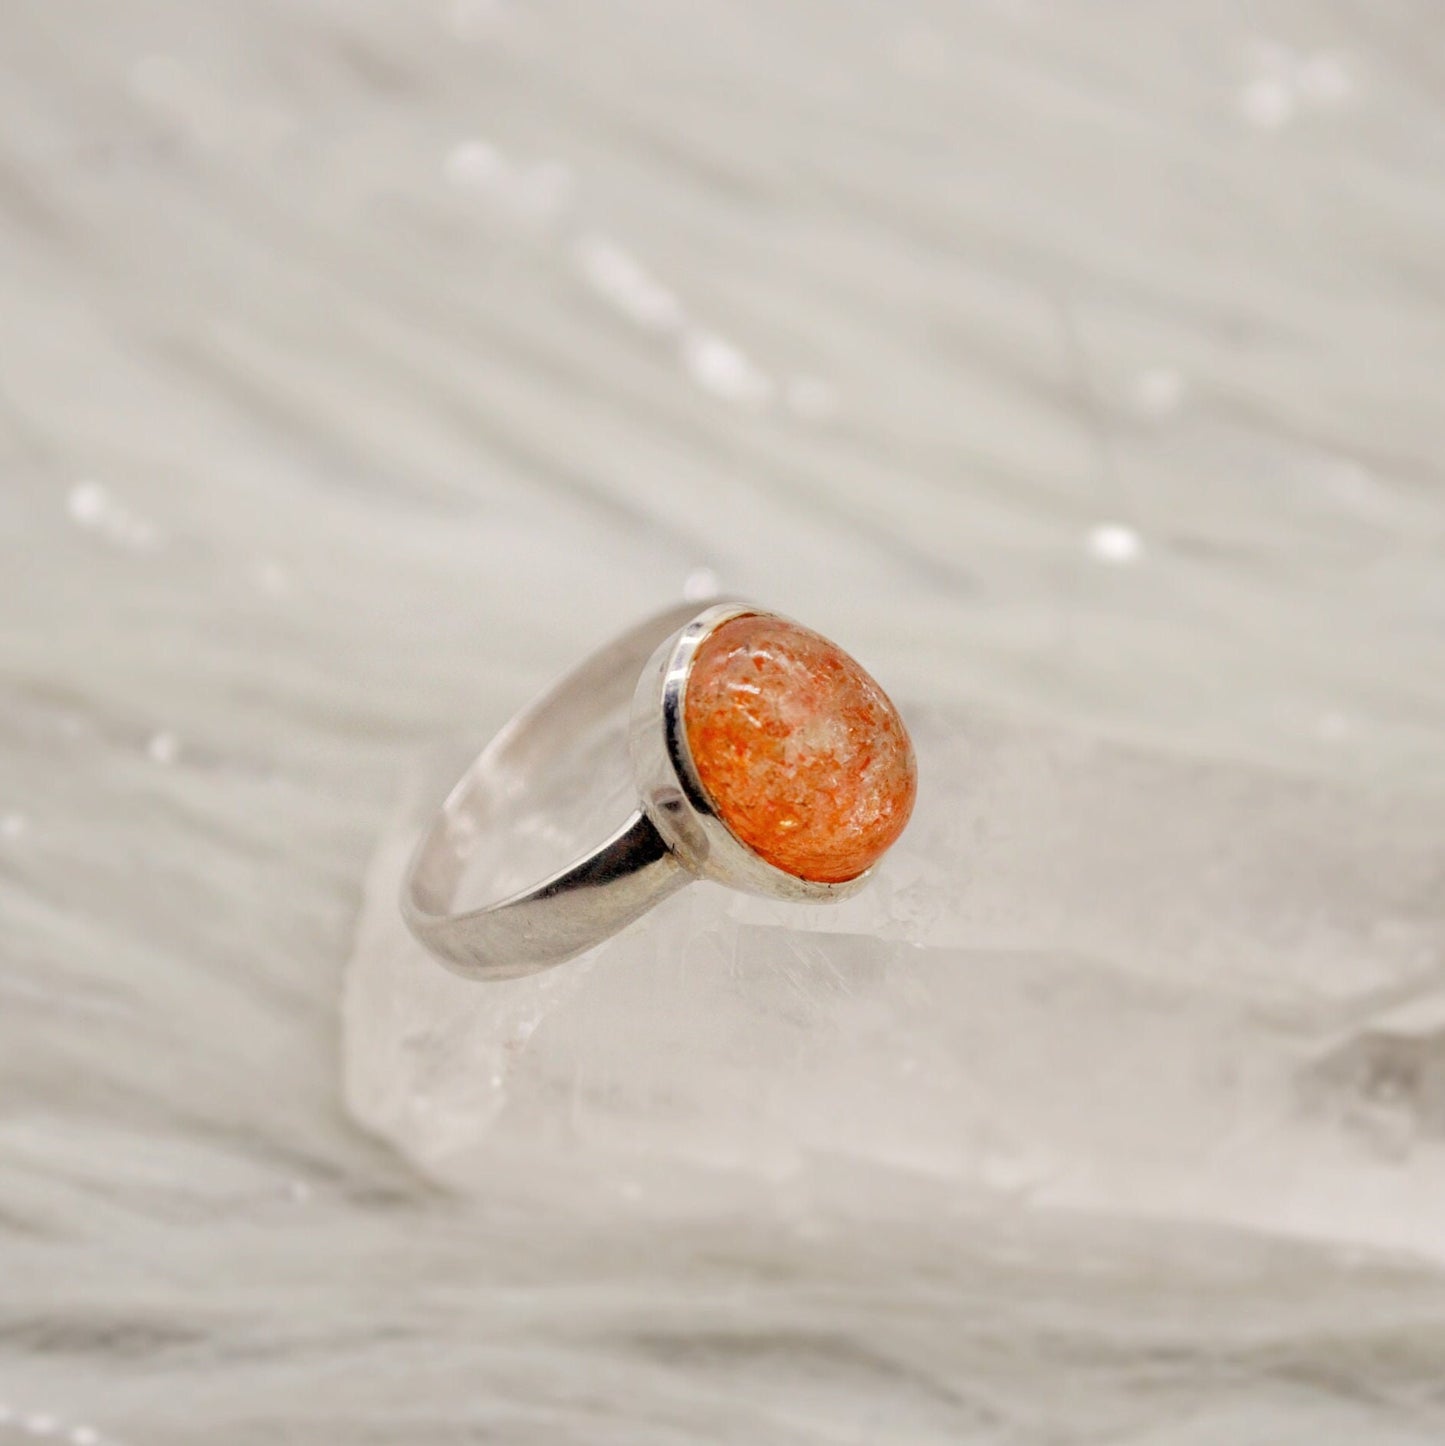 Sunstone Sterling Silver Ring, Orange Gemstone Ring, Rings For Women, Sunstone Jewelry, Birthday Gift For Her, Mothers Day Gift, Anniversary